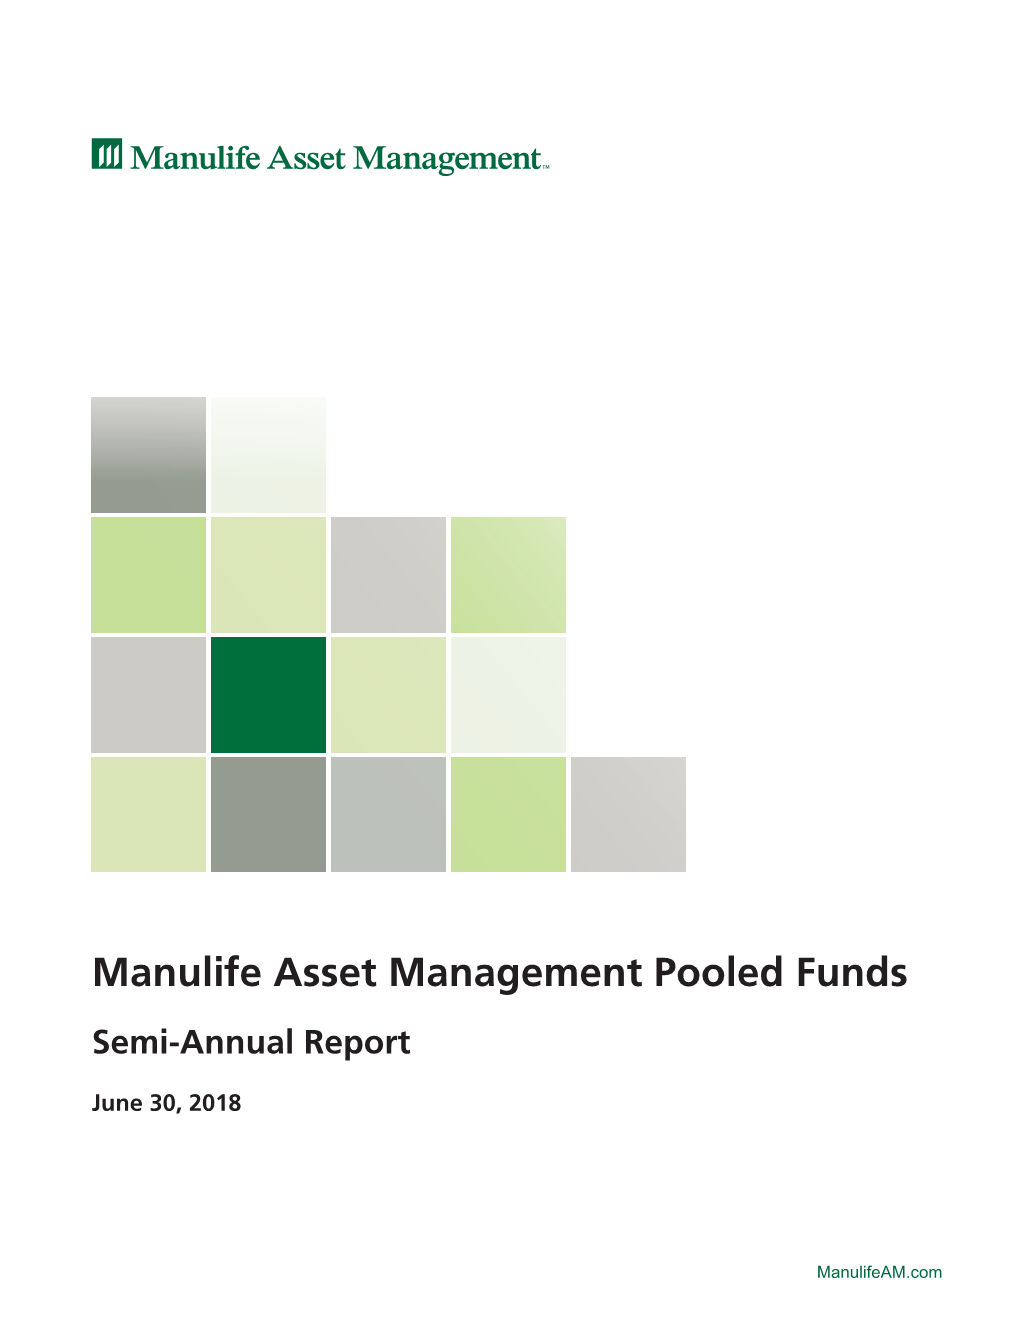 Manulife Asset Management Pooled Funds Semi-Annual Report